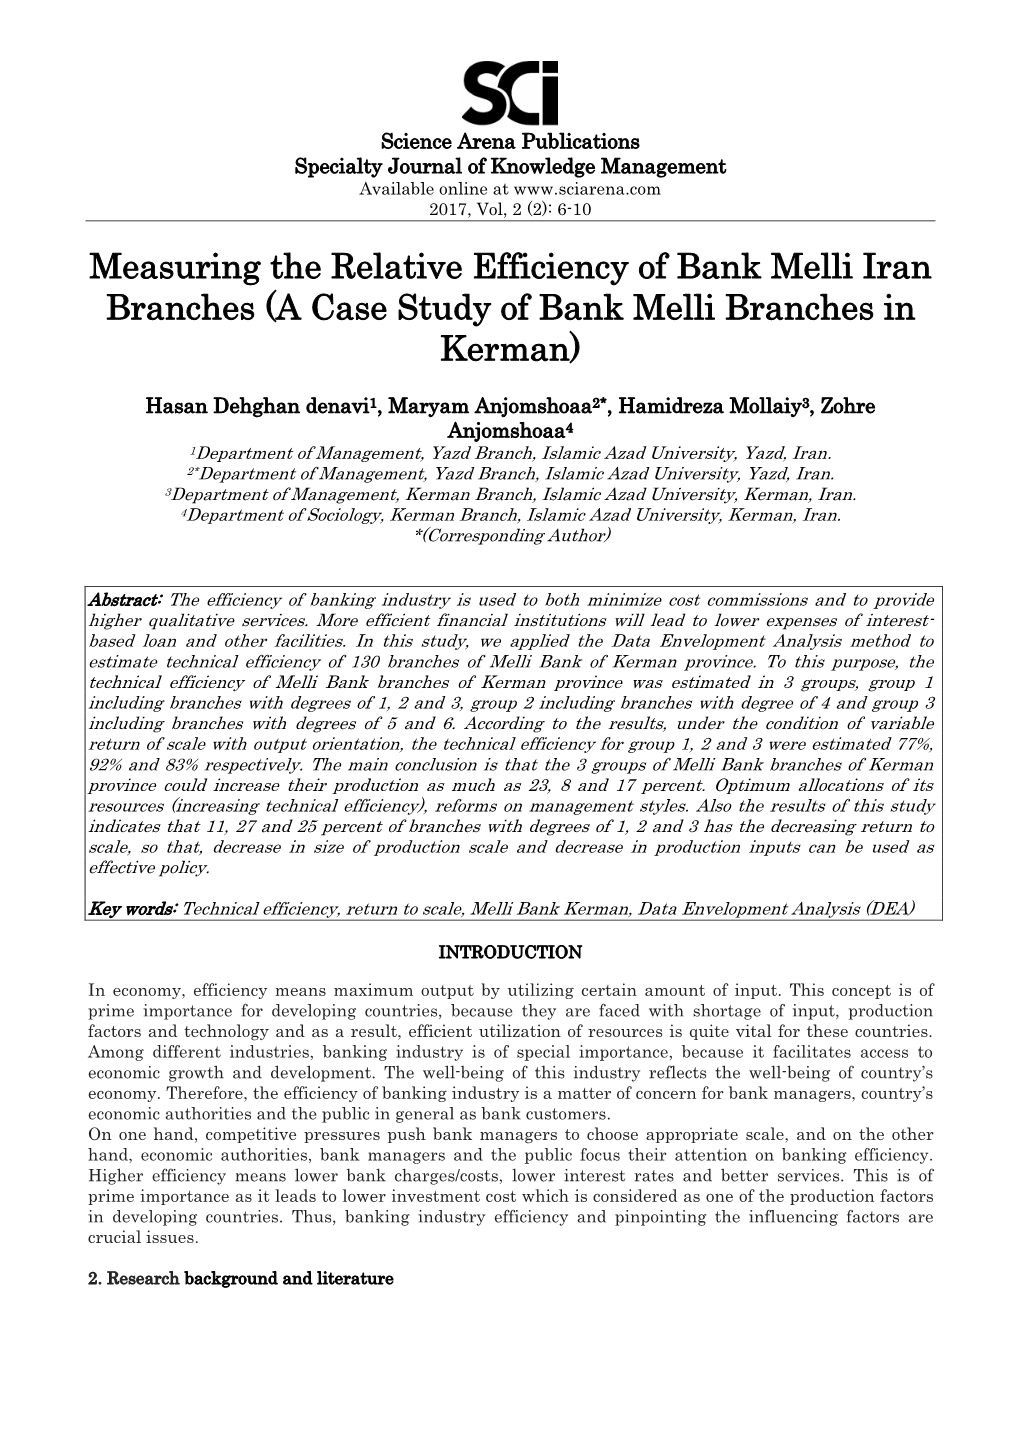 Measuring the Relative Efficiency of Bank Melli Iran Branches (A Case Study of Bank Melli Branches in Kerman)